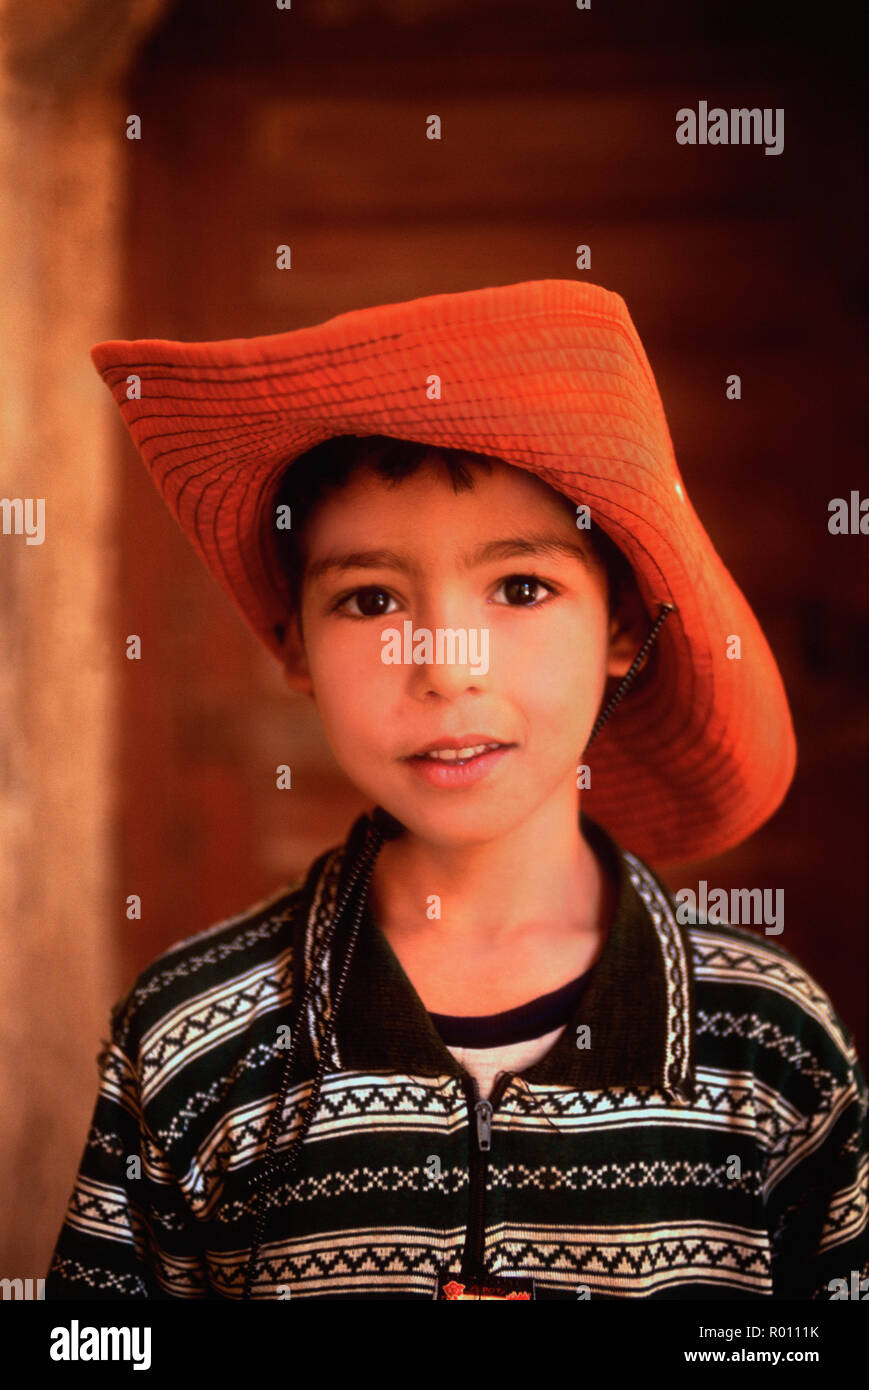 Portrait of a young boy wearing a hat. Stock Photo